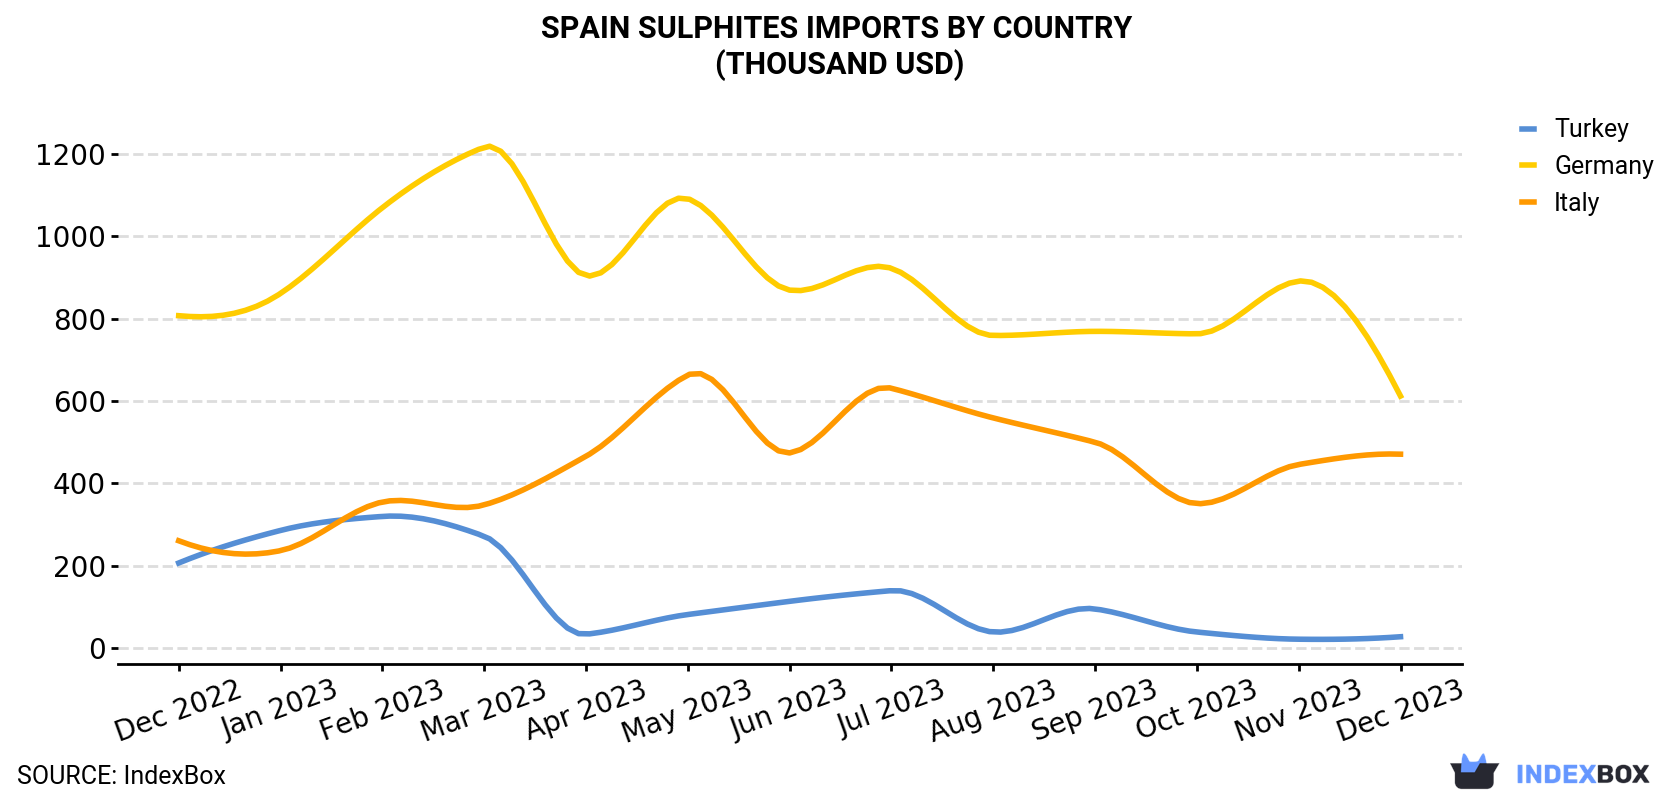 Spain Sulphites Imports By Country (Thousand USD)